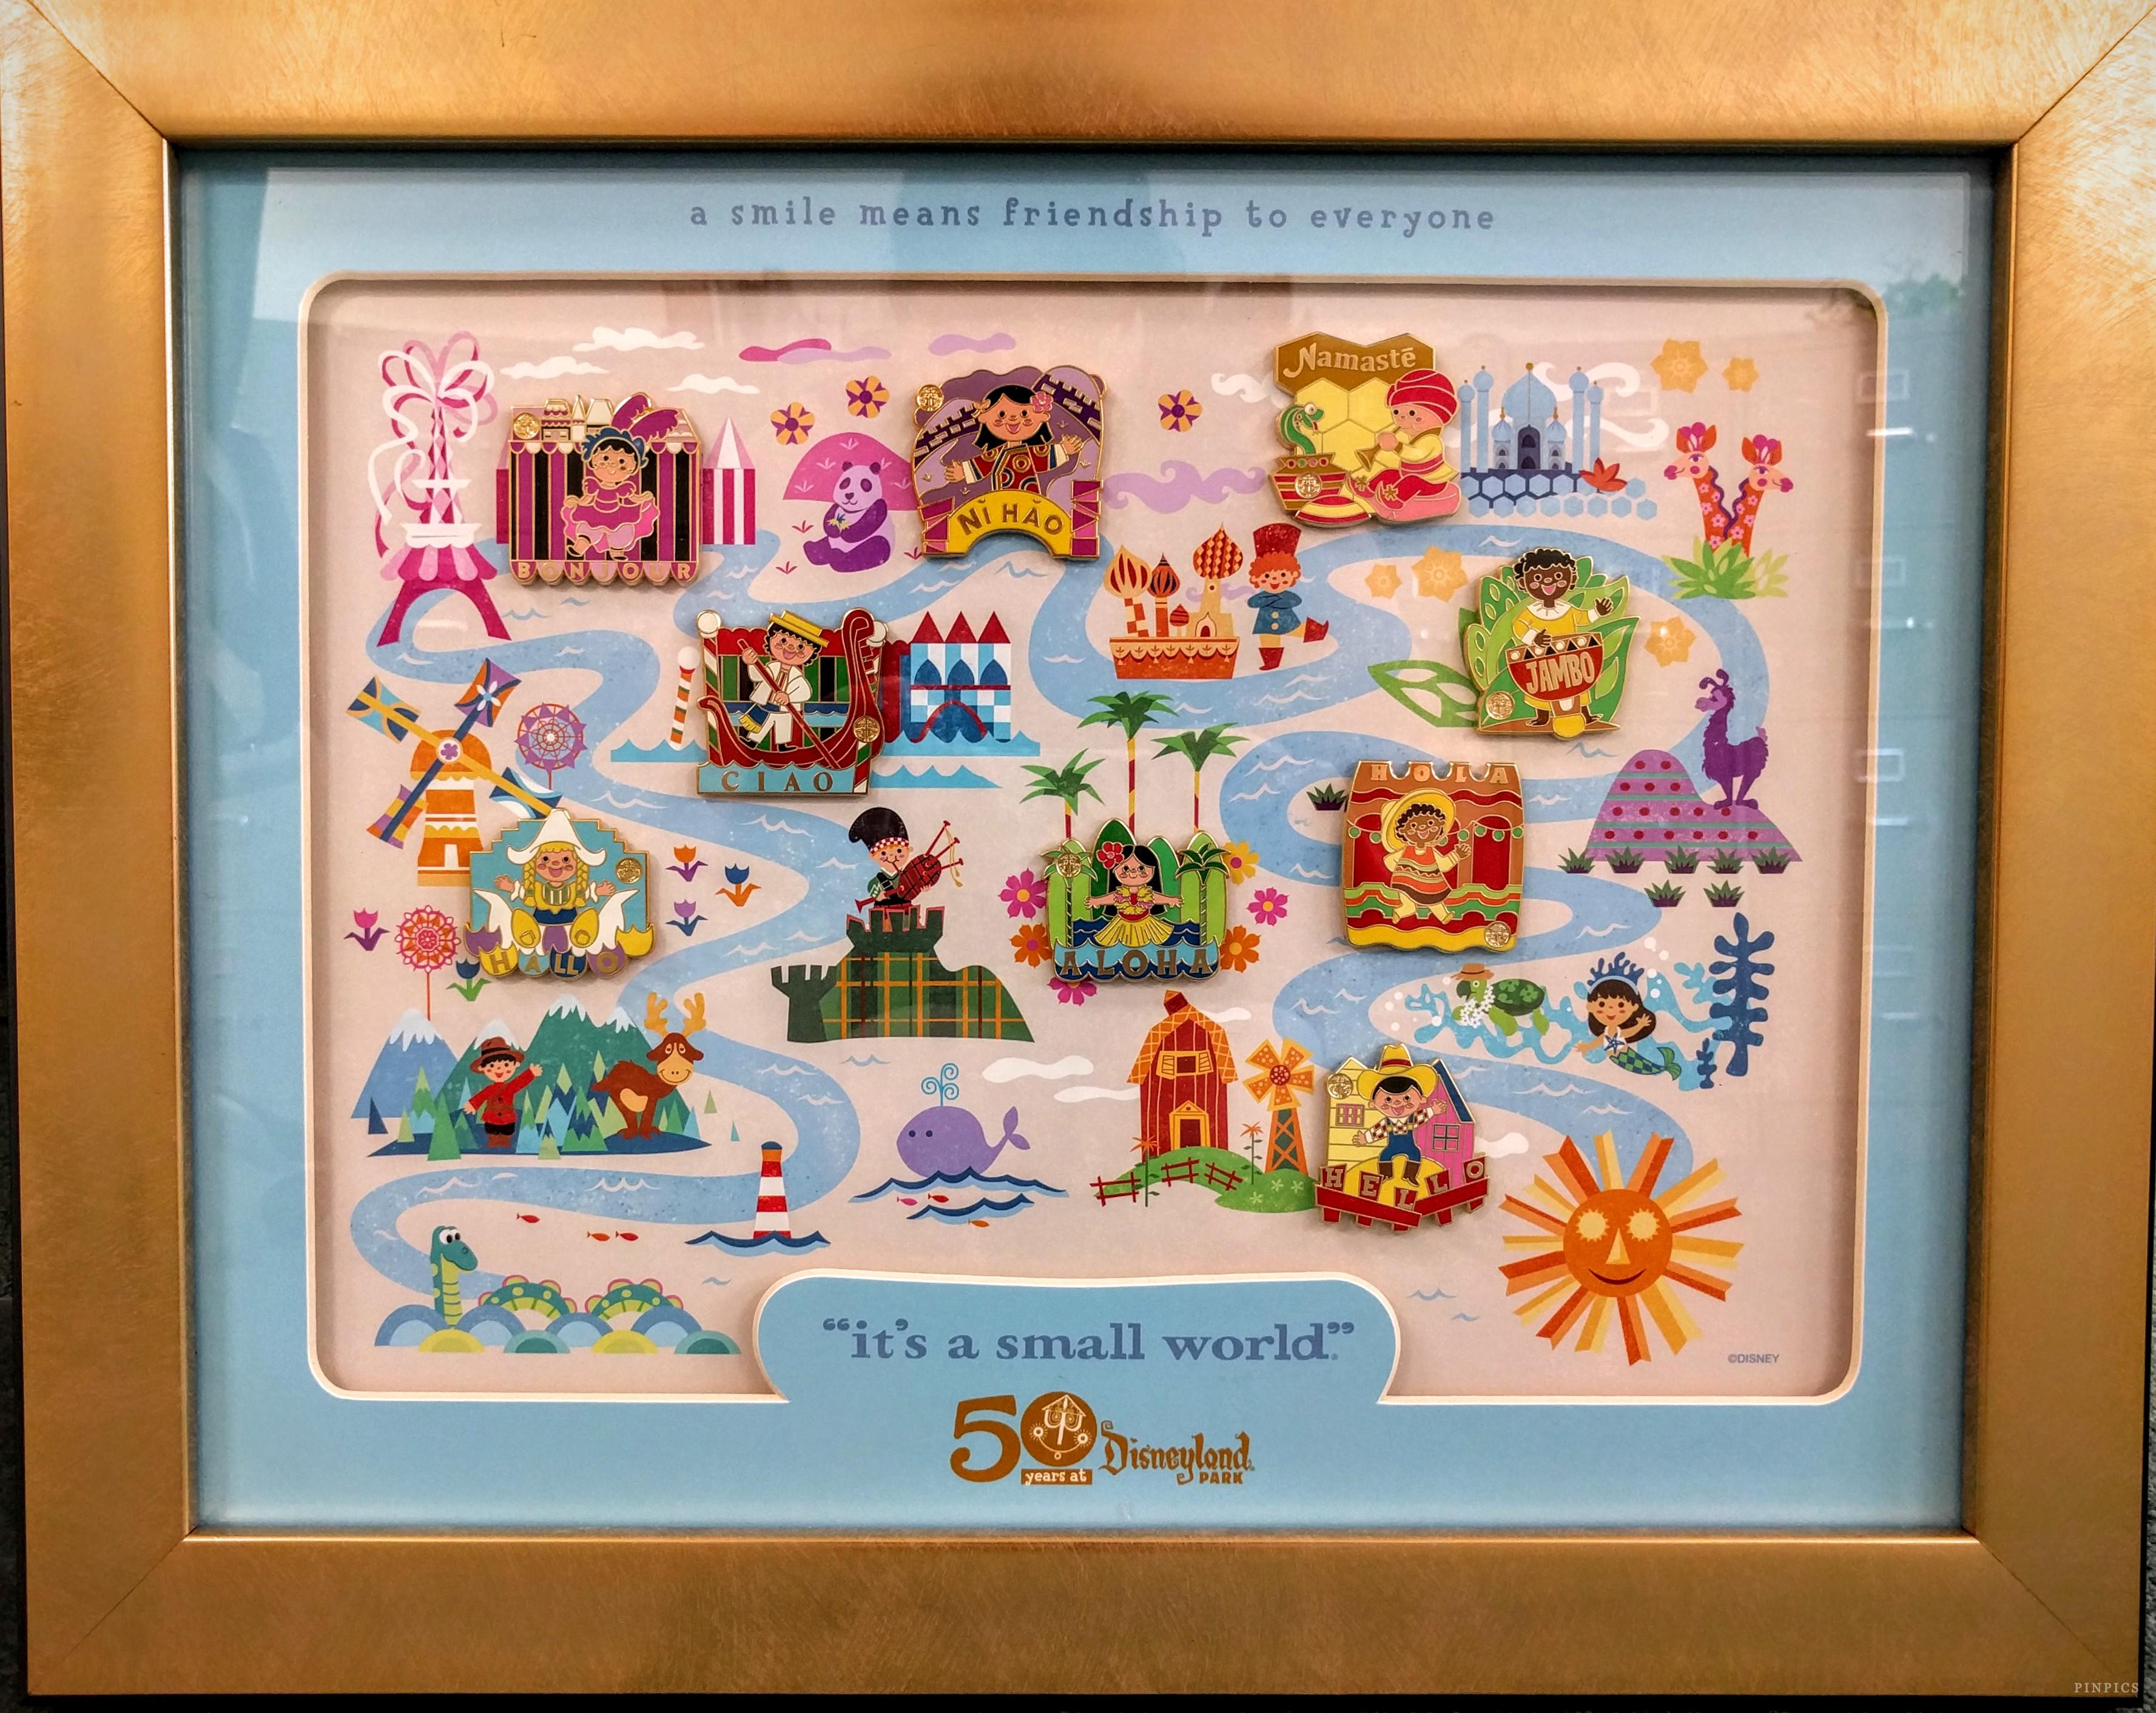 DLR - it's a small world 50th Anniversary - a smile means friendship to everyone Framed Set